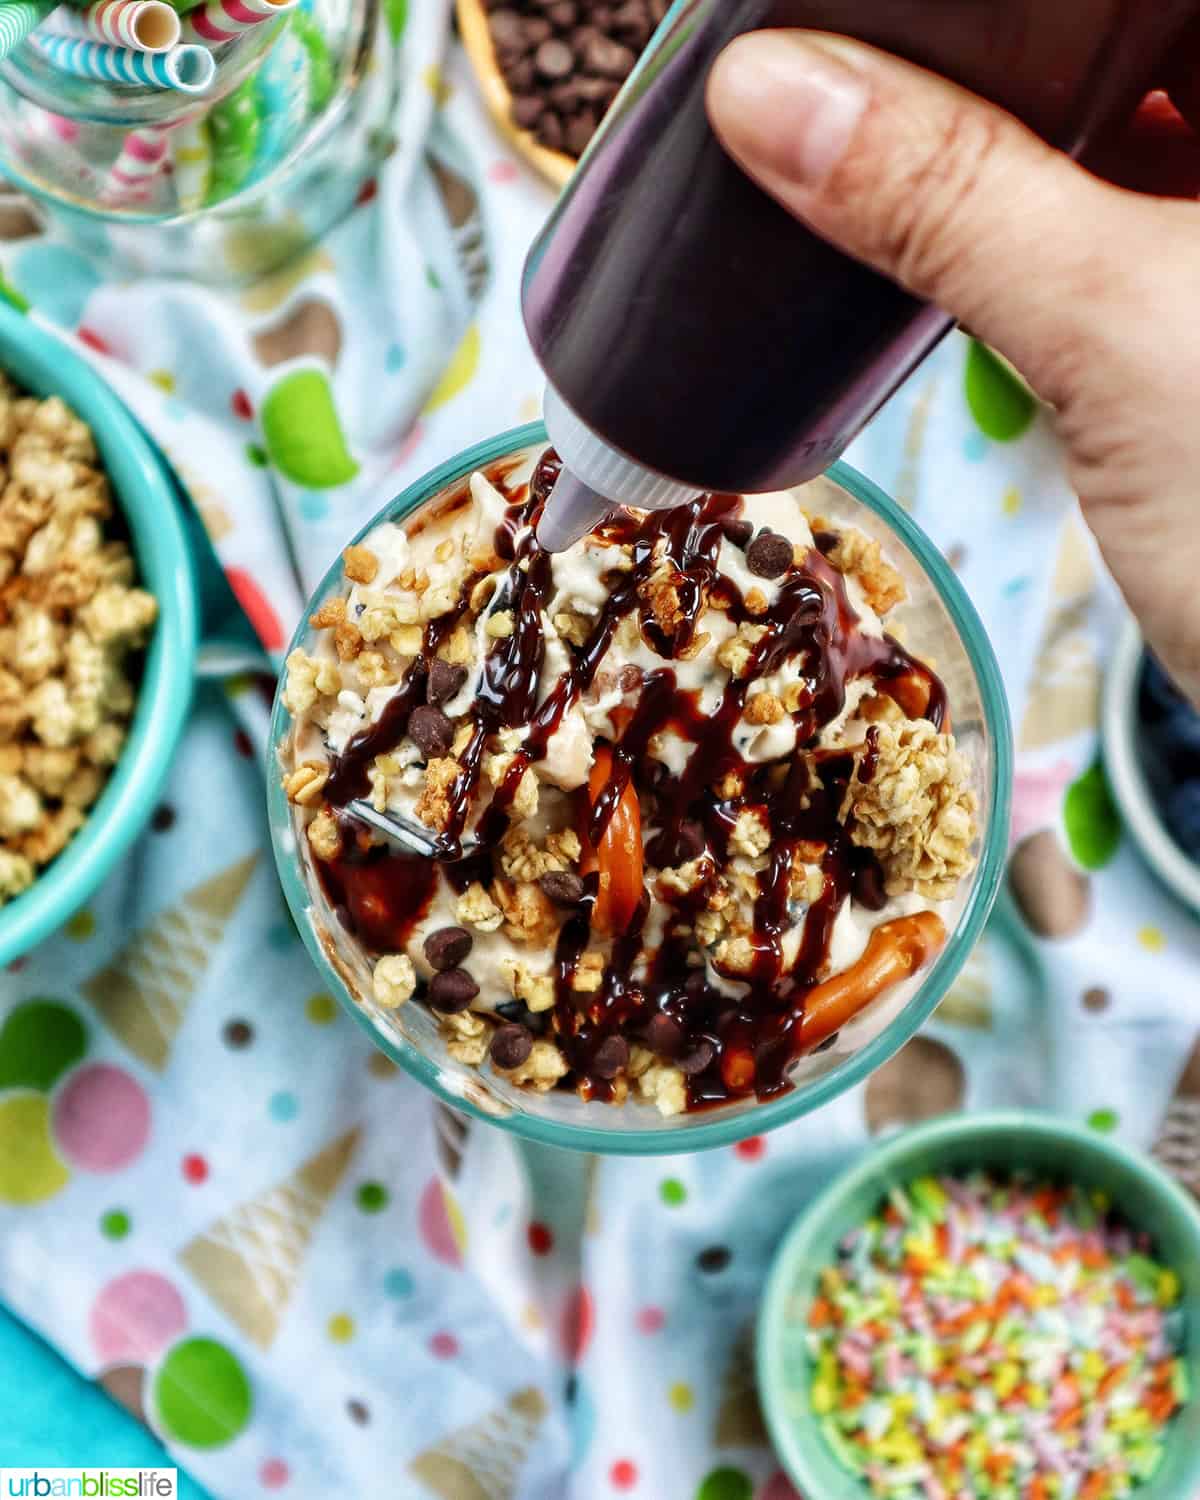 squeeze bottle of chocolate syrup over ice cream parfaits.